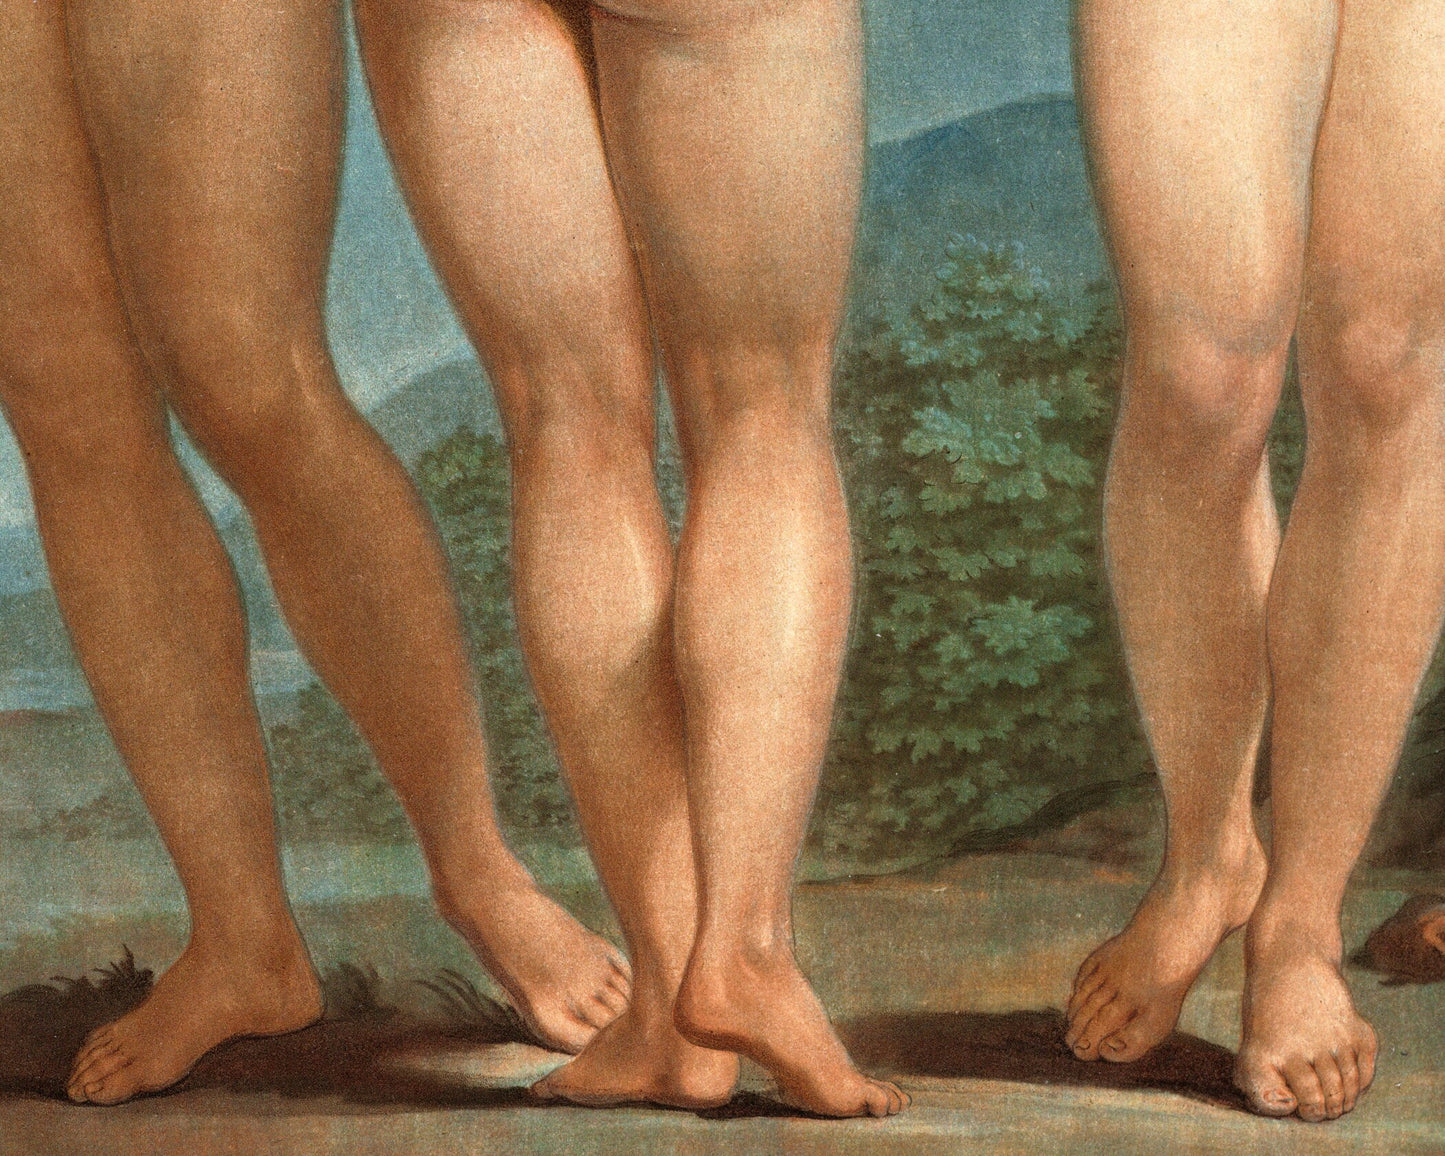 The Three Graces by Jean François Janinet